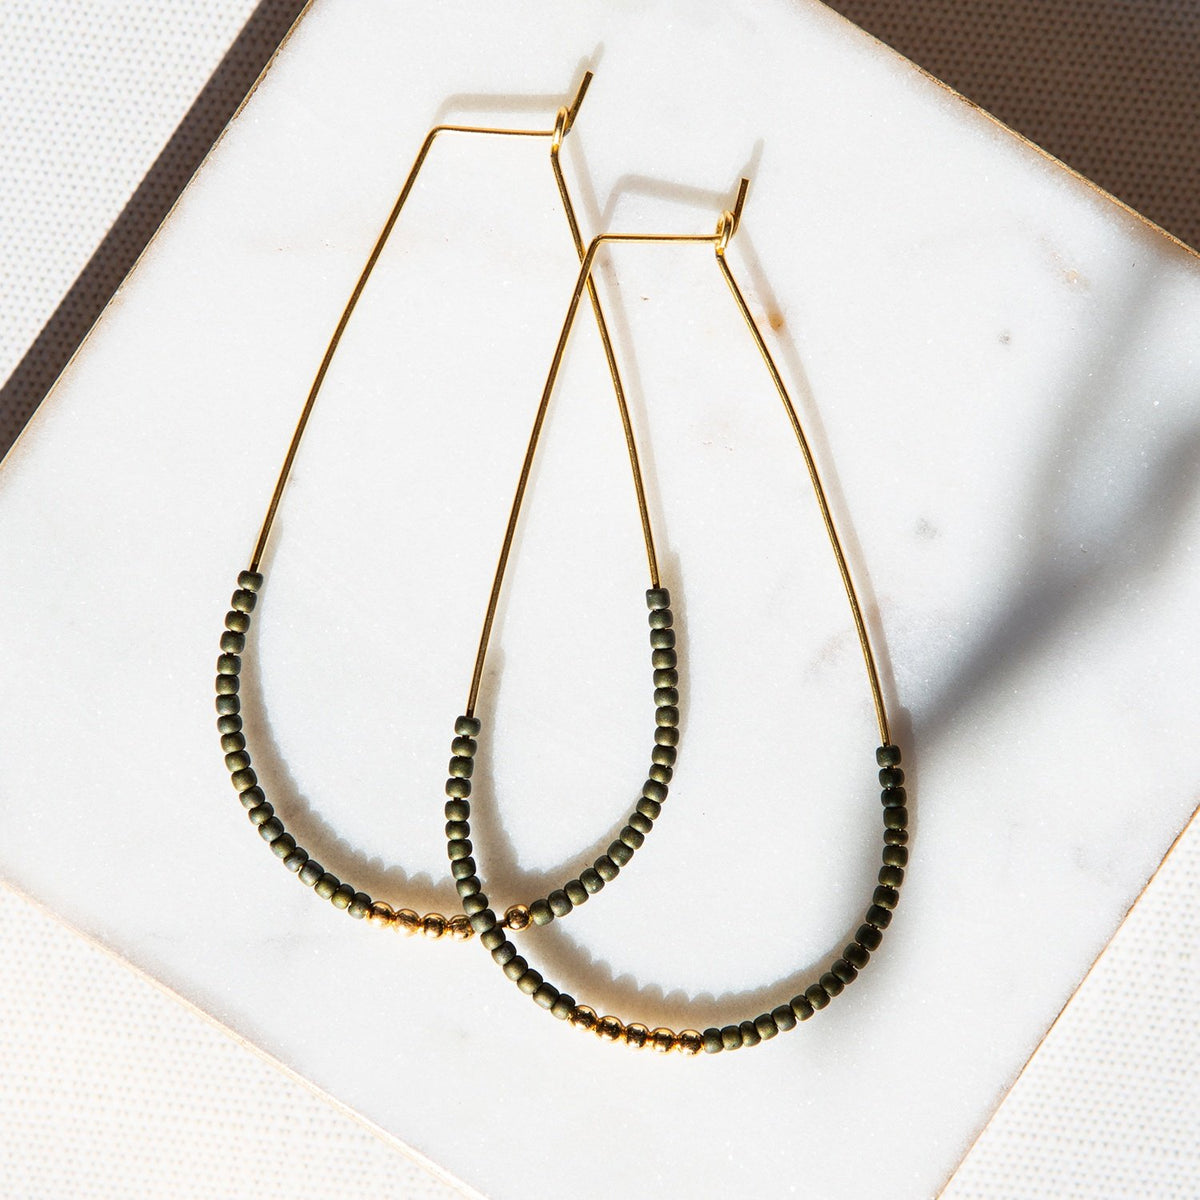 Delicate gold wire earrings with tiny olive green accent beads. Scarlett style by Lenny & Eva Jewelry.